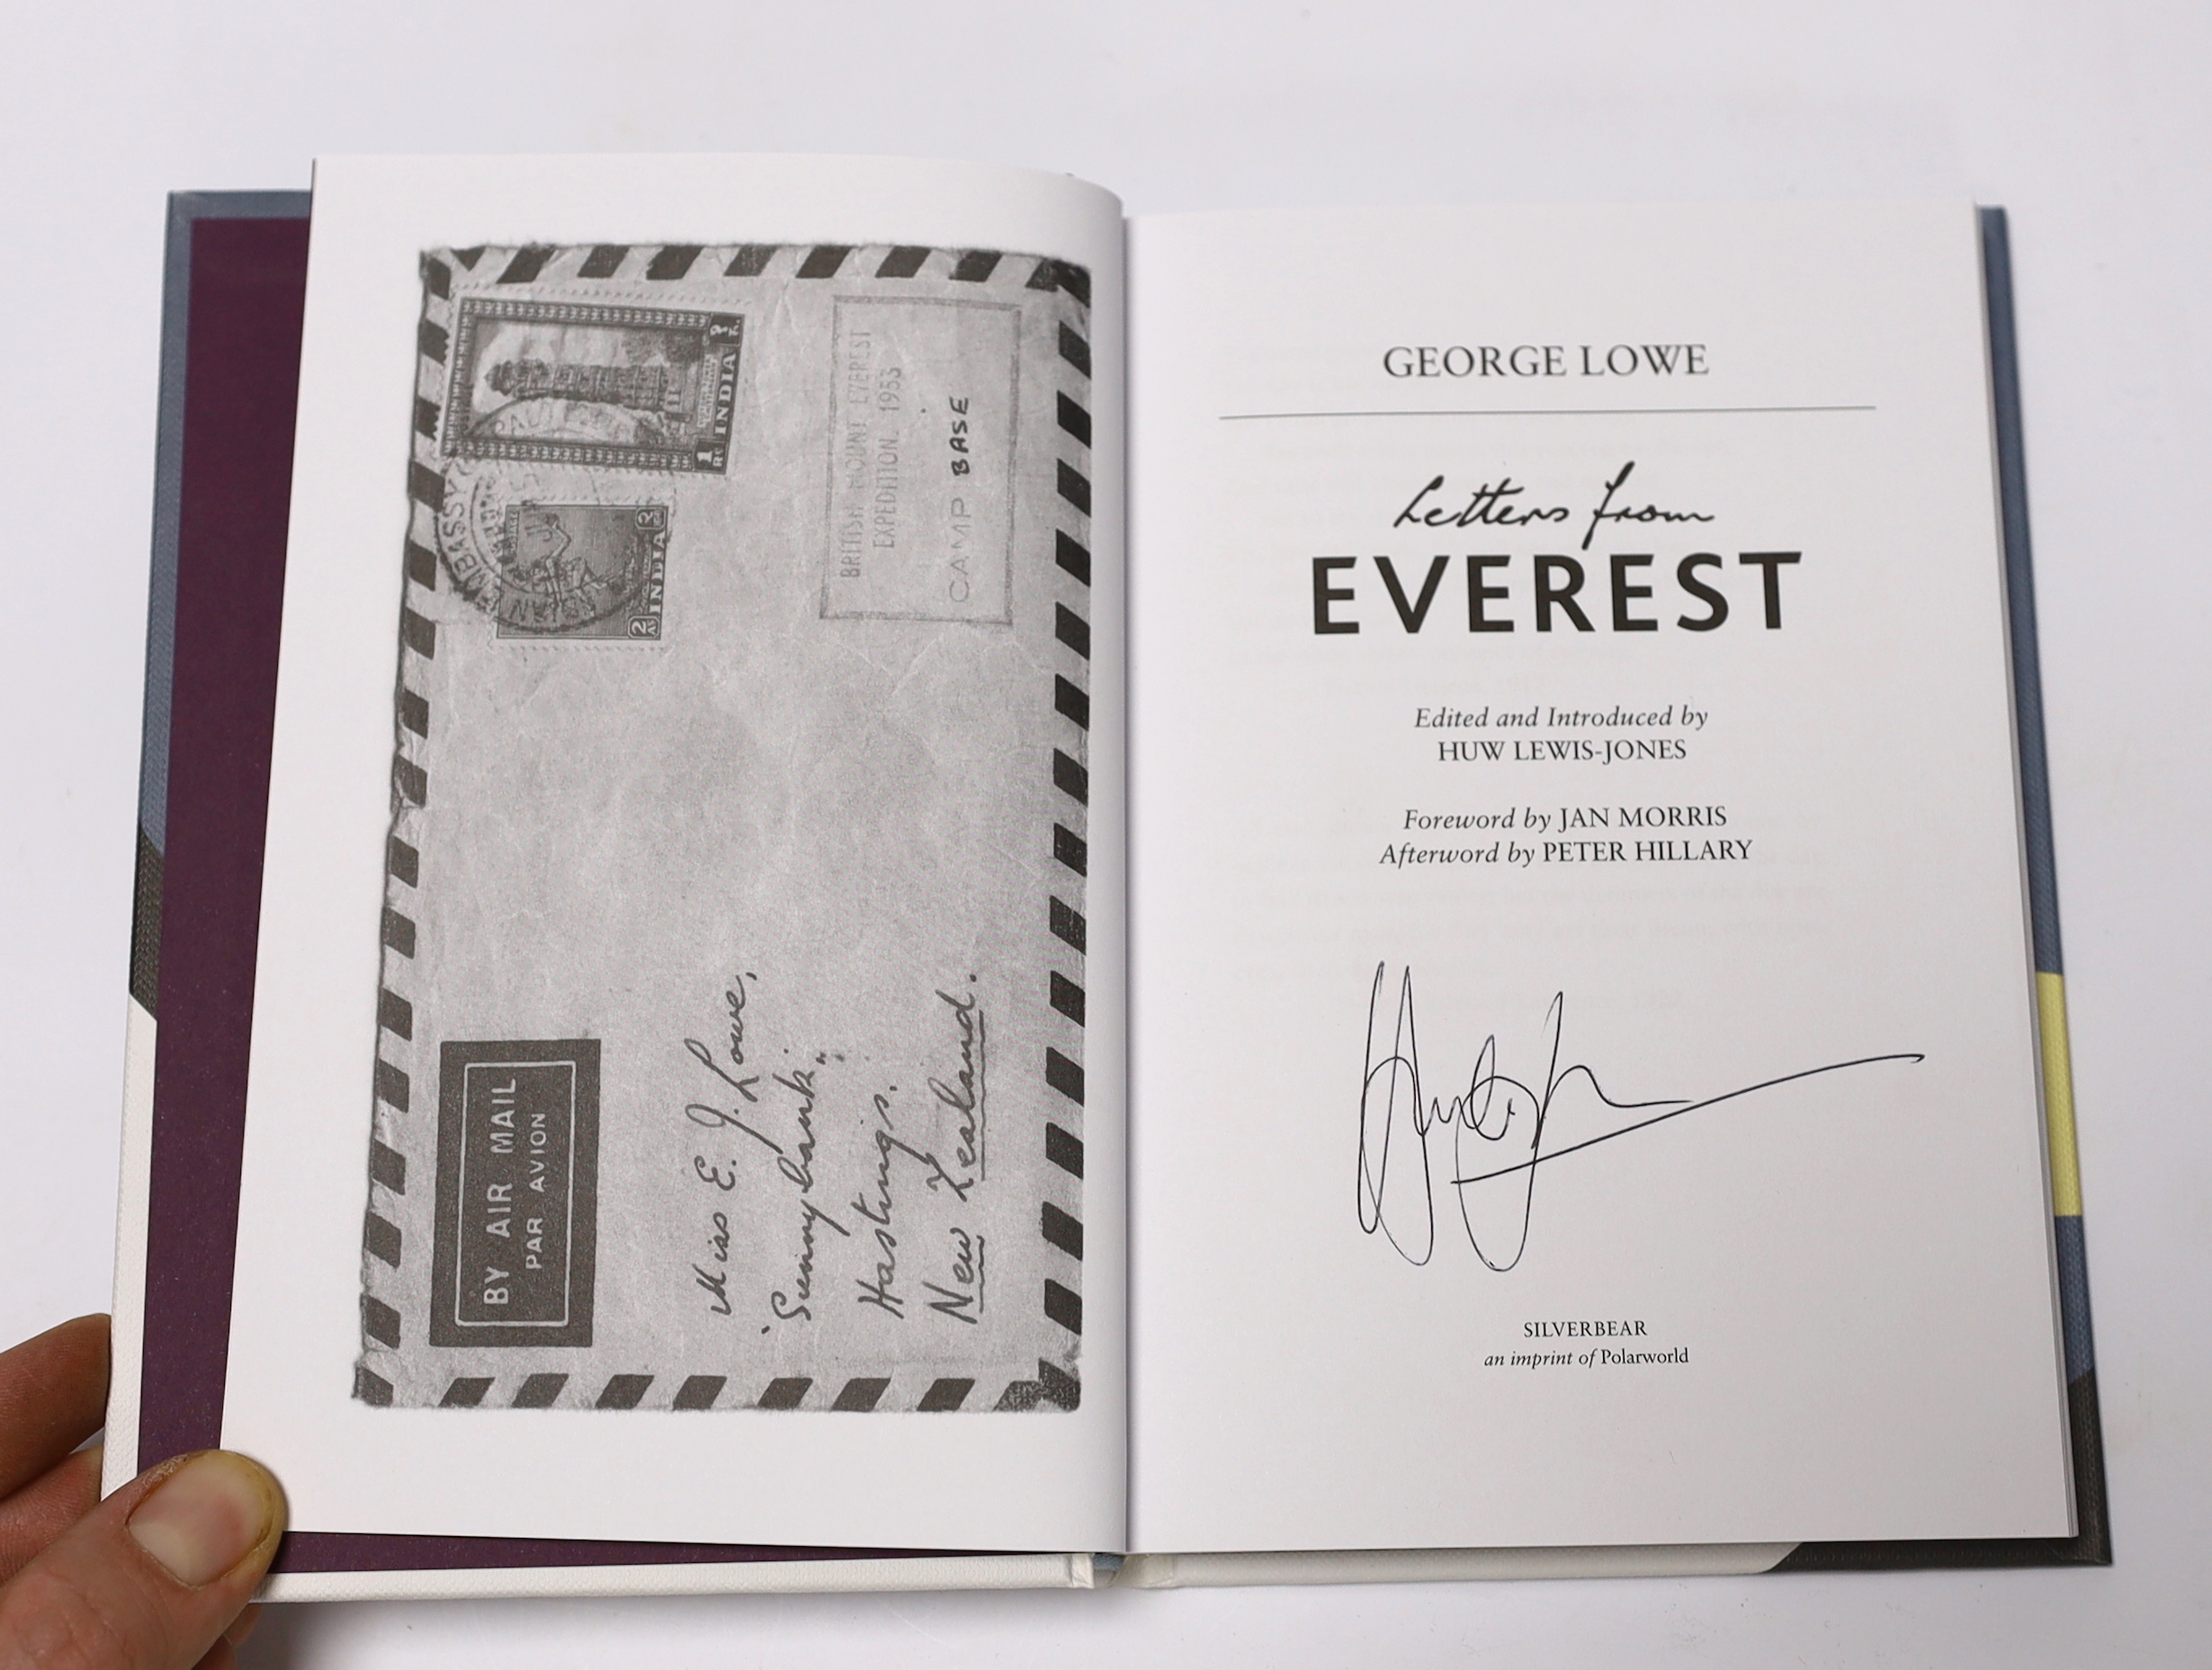 Lowe, George - Letters from Everest, 60th Anniversary collector’s edition, number 10 of 60, signed by Huw Lewis-Jones (editor), Jan Morris and Peter Hillary, a small clipping of George Lowe’s 1953 Everest sleeping bag st